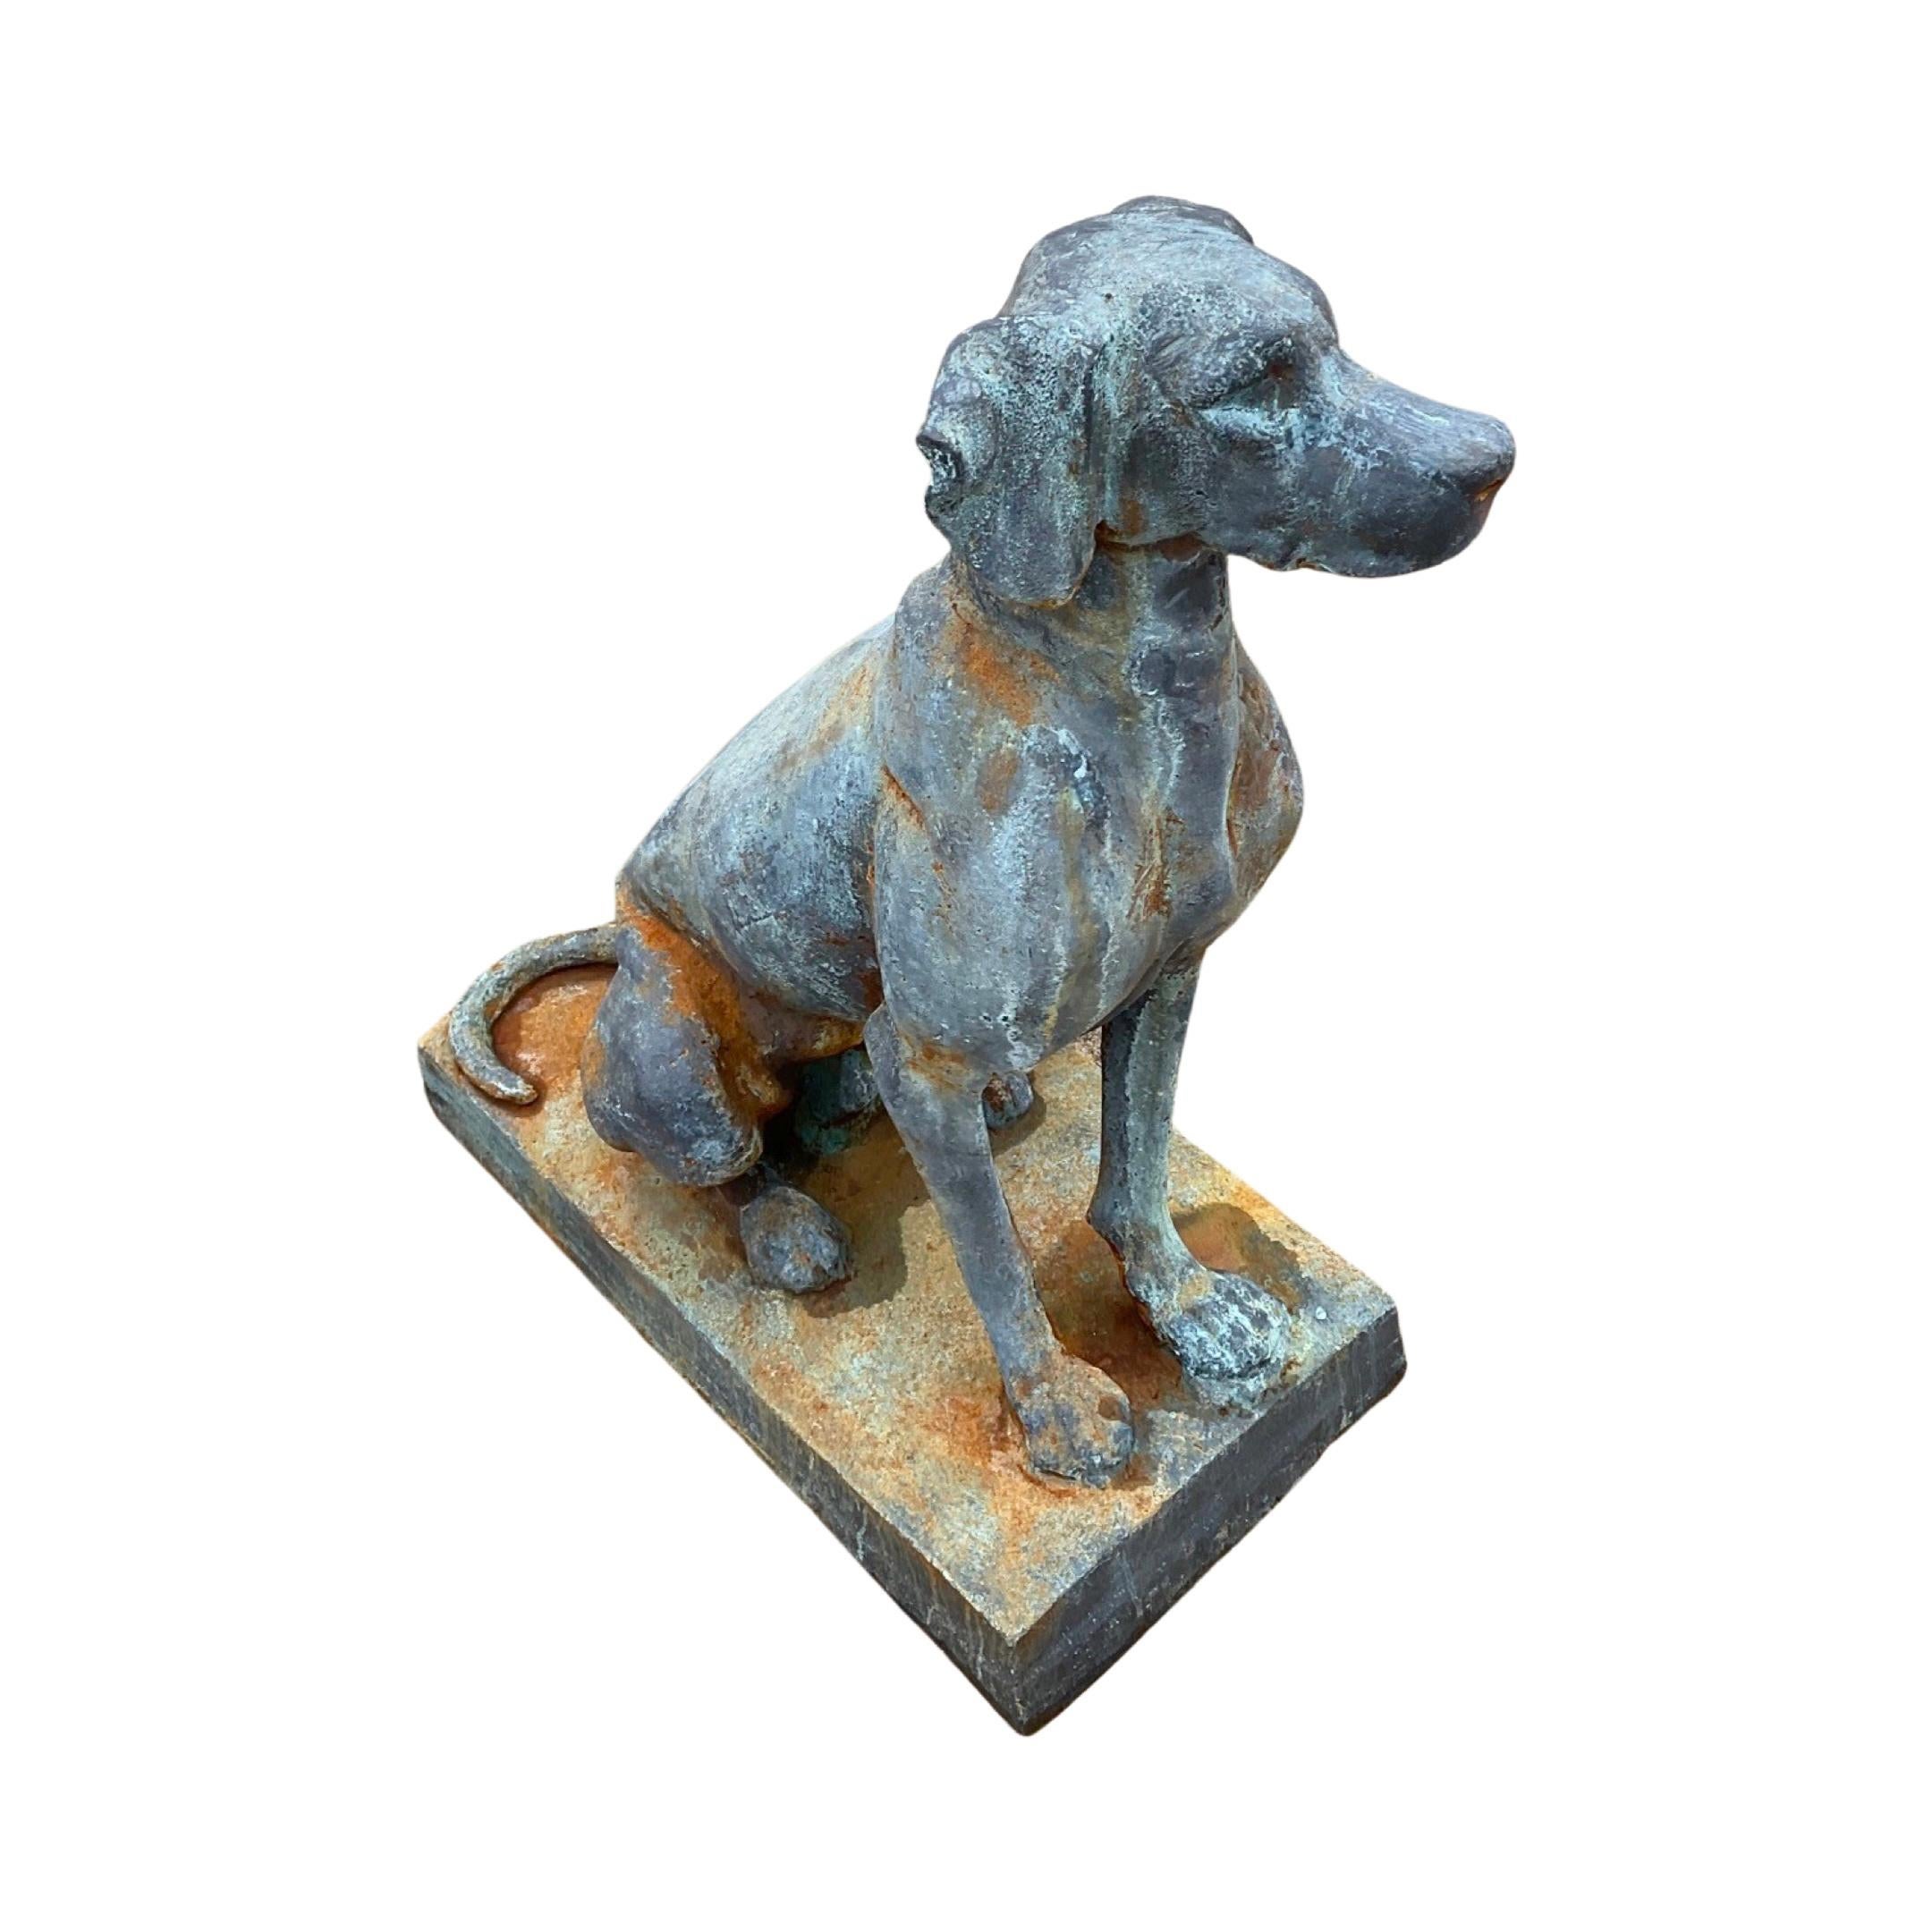 Pair of French Iron Dog Sculptures For Sale 1